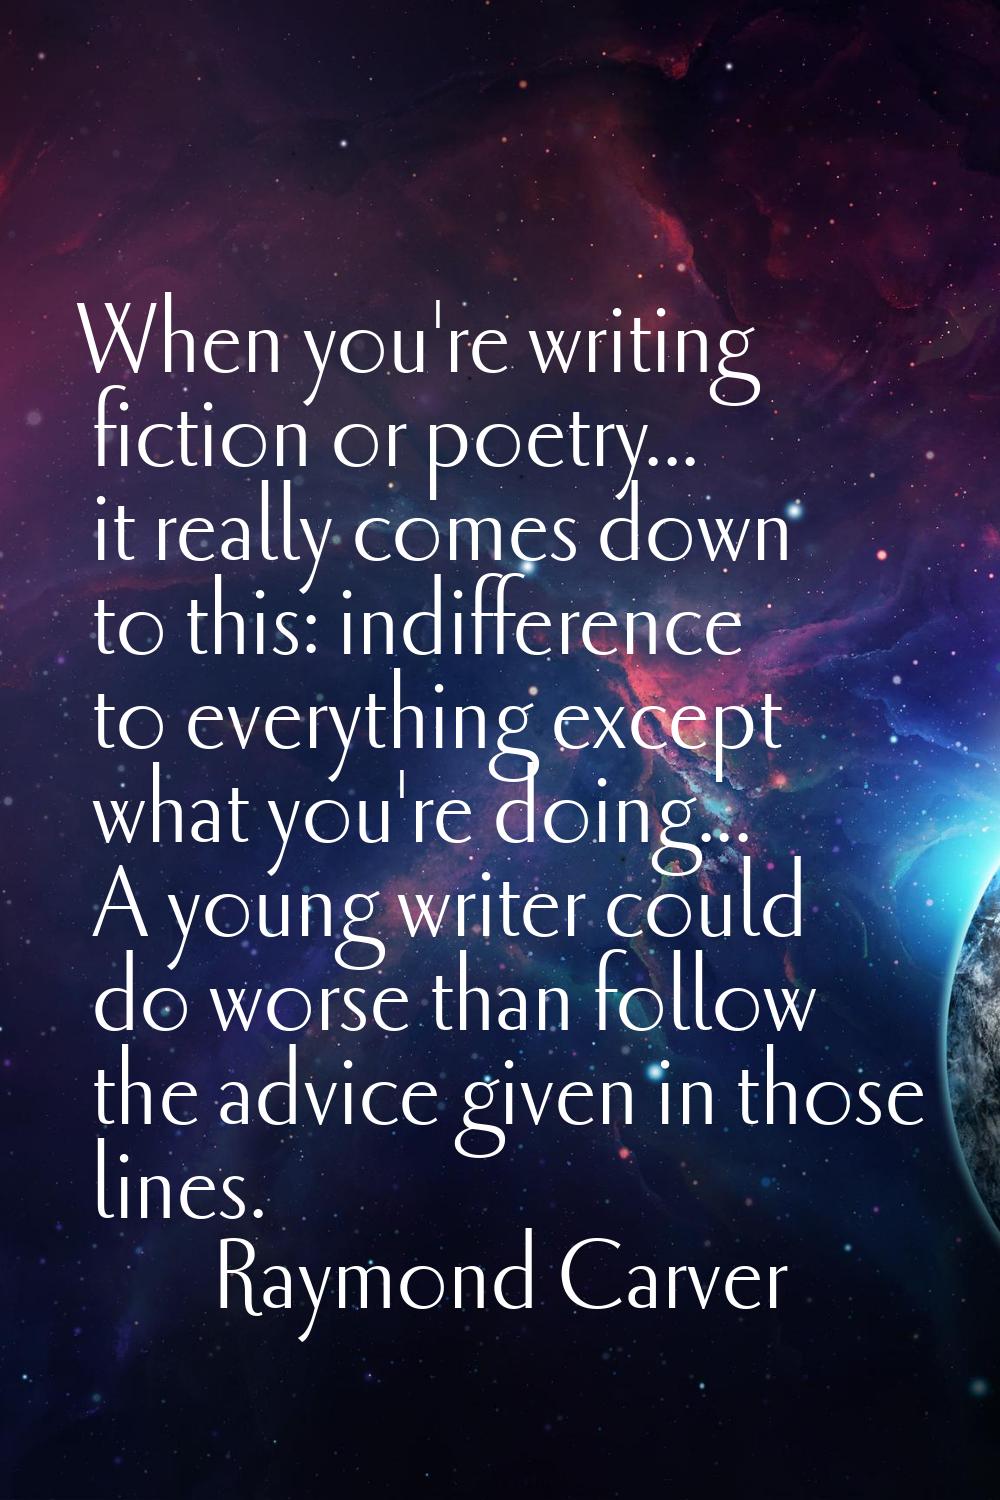 When you're writing fiction or poetry... it really comes down to this: indifference to everything e